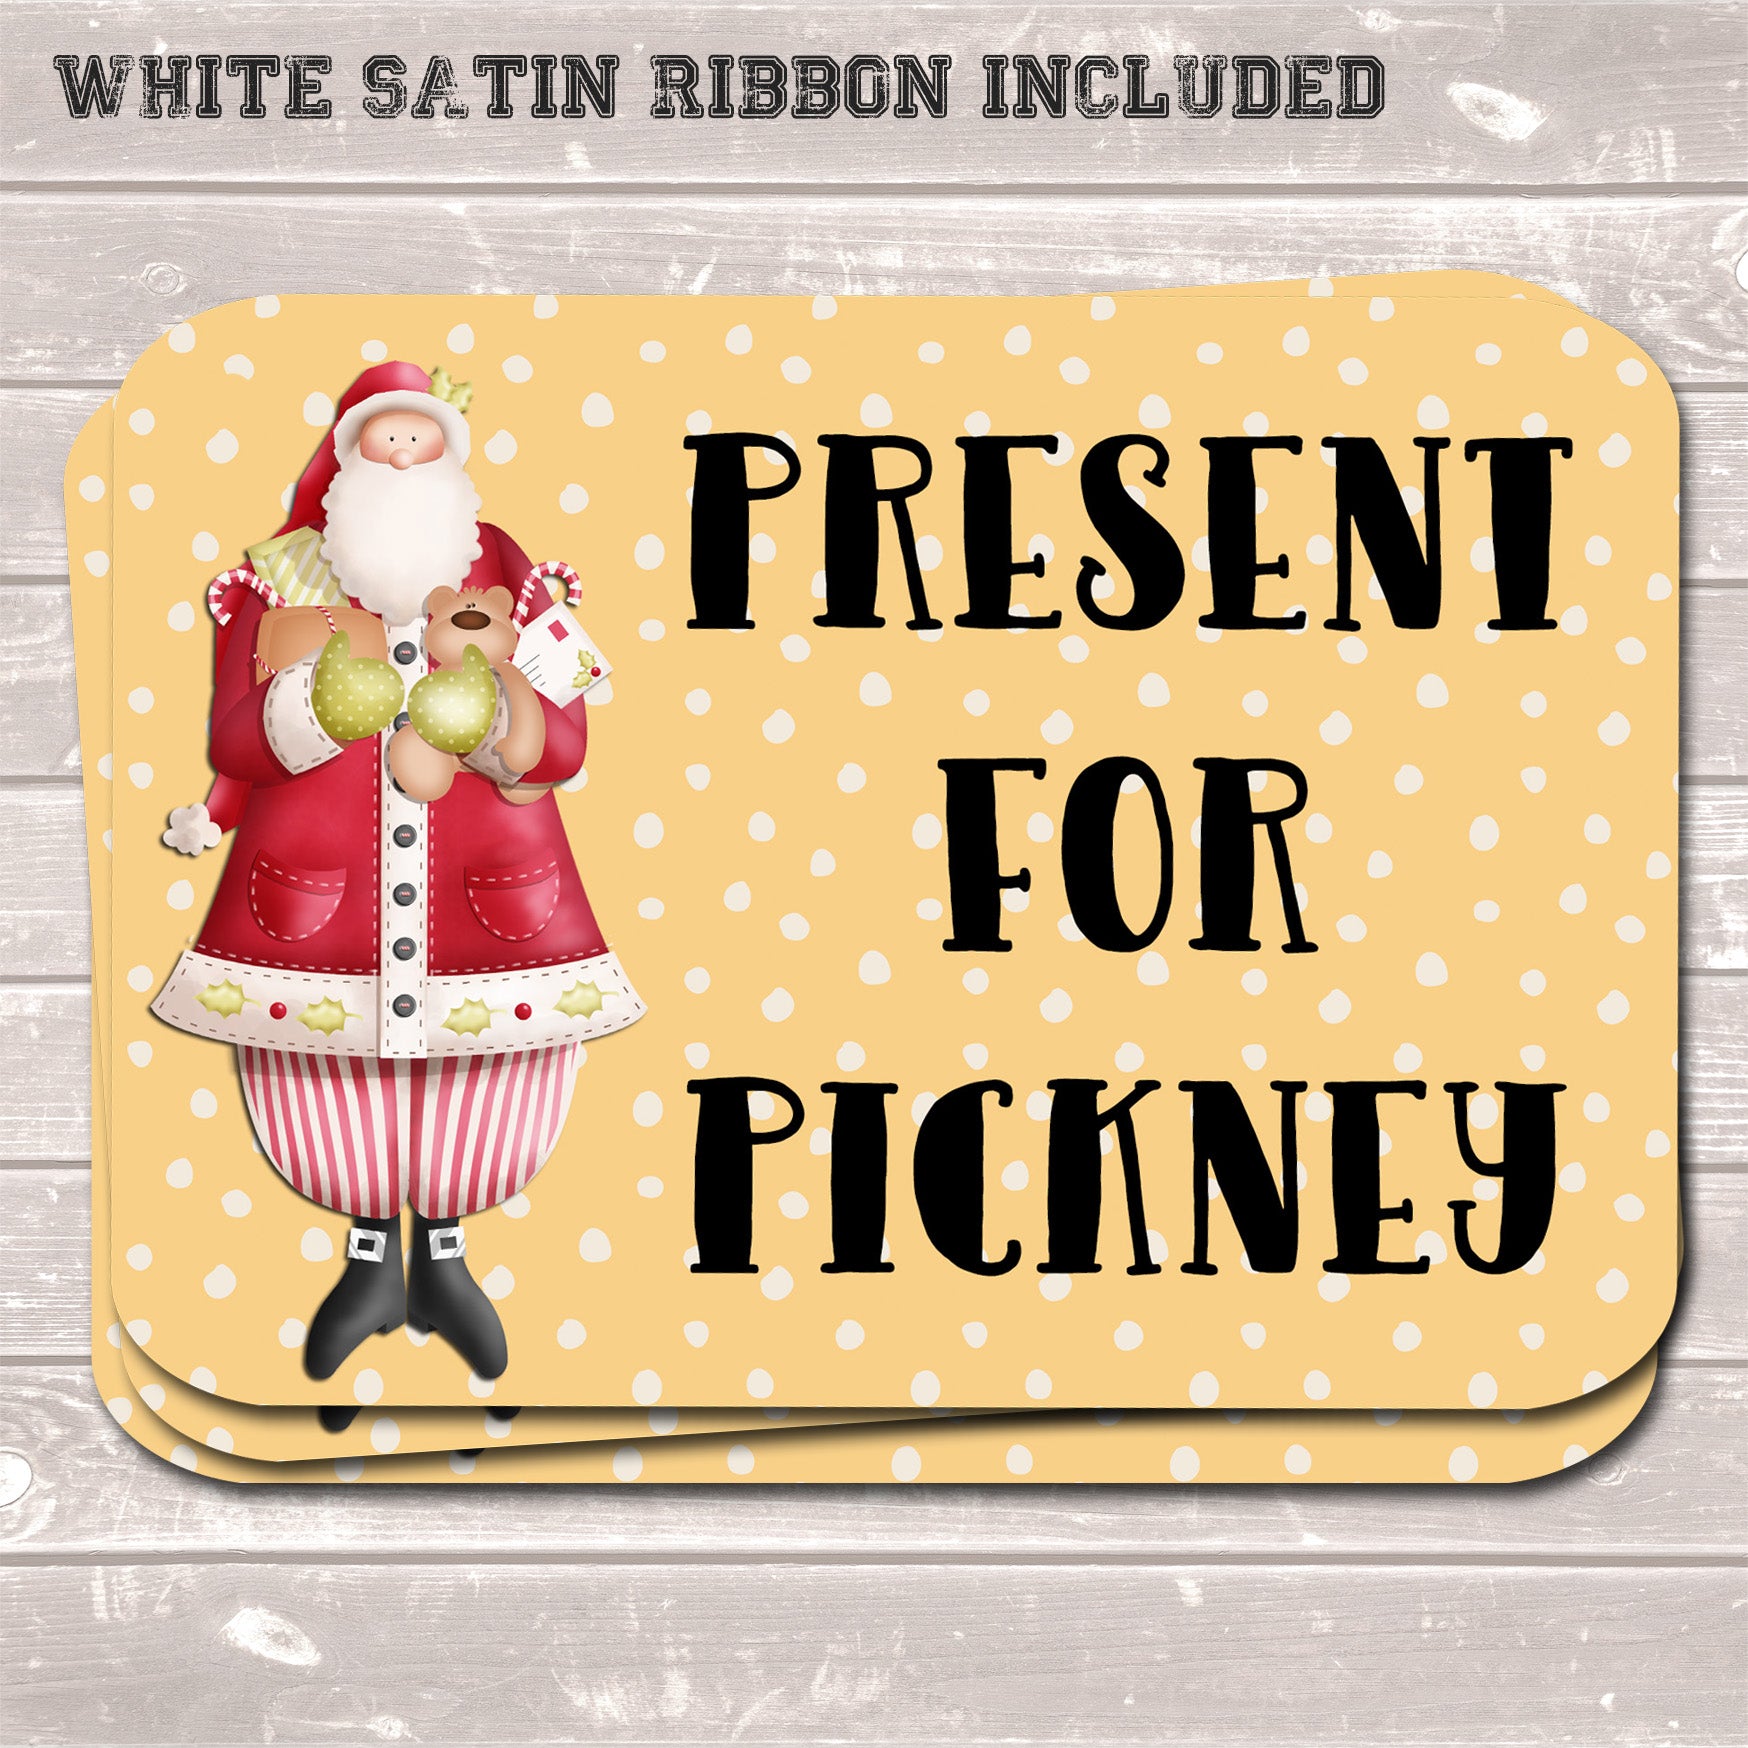 Christmas Gift Tags, Present for Pickney, Funny Present Accessories (Pack of 8)